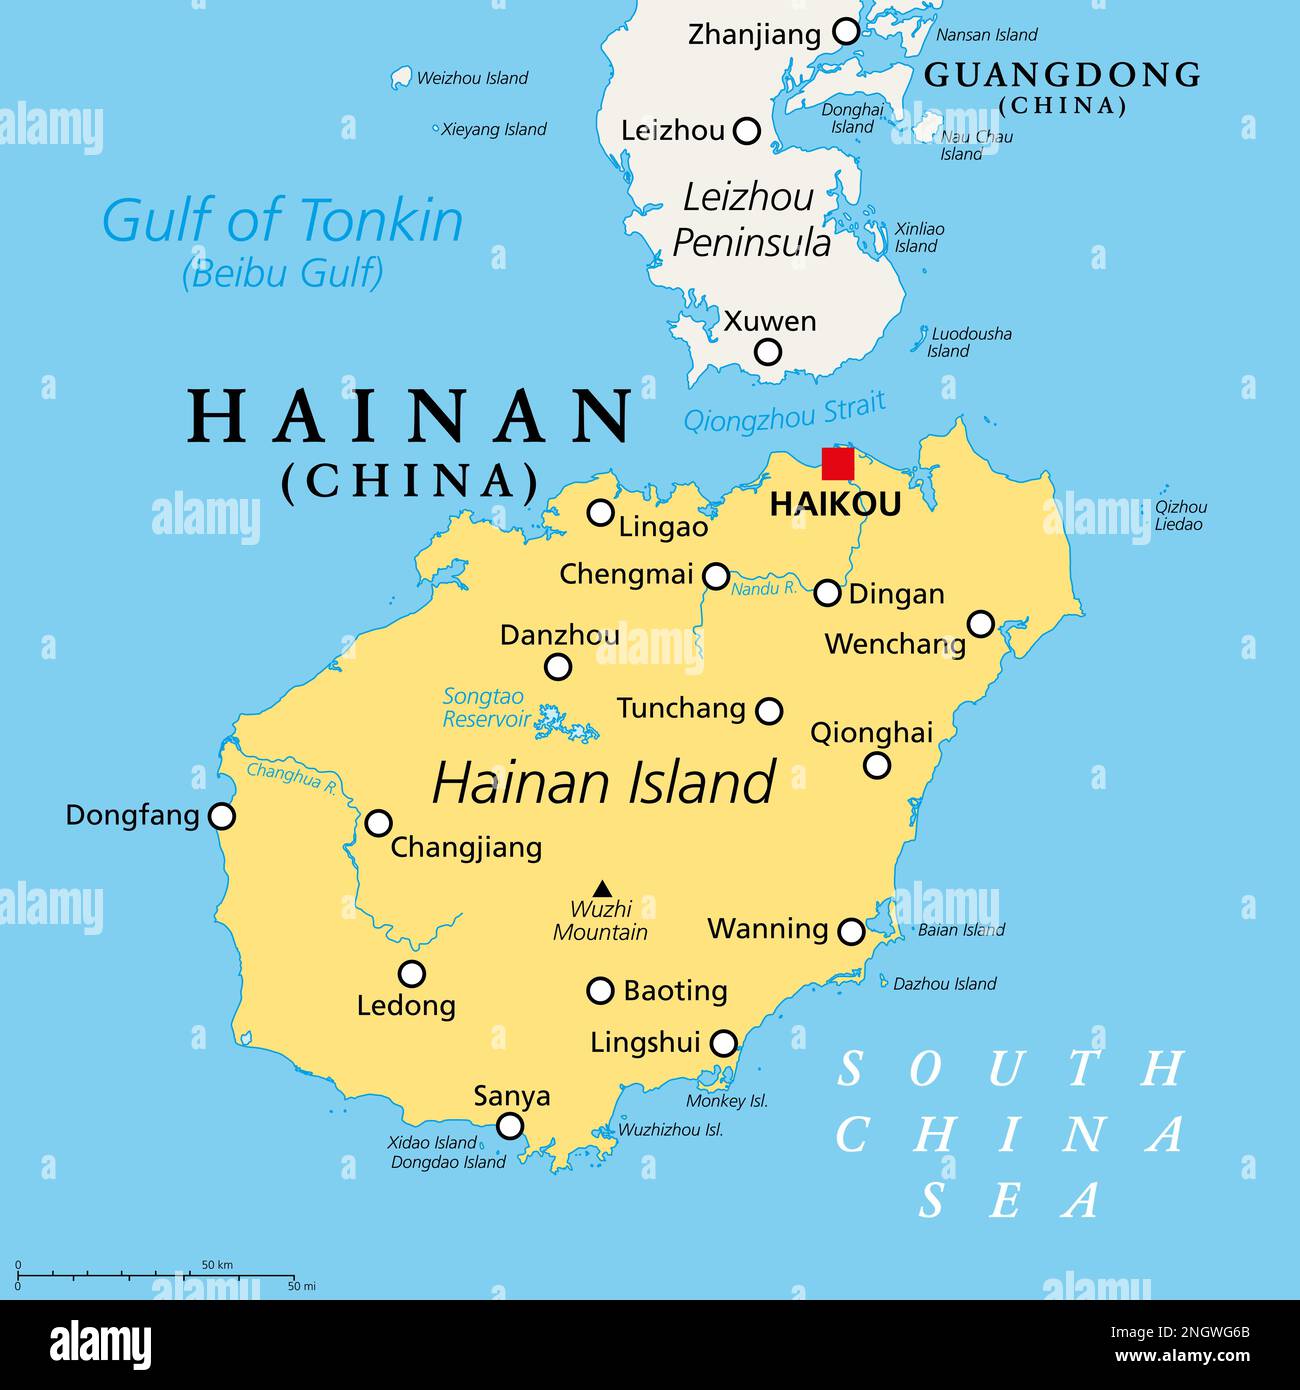 Hainan, smallest and southernmost province of China, PRC, political map. Consisting of Hainan Island and various small islands in the South China Sea. Stock Photo